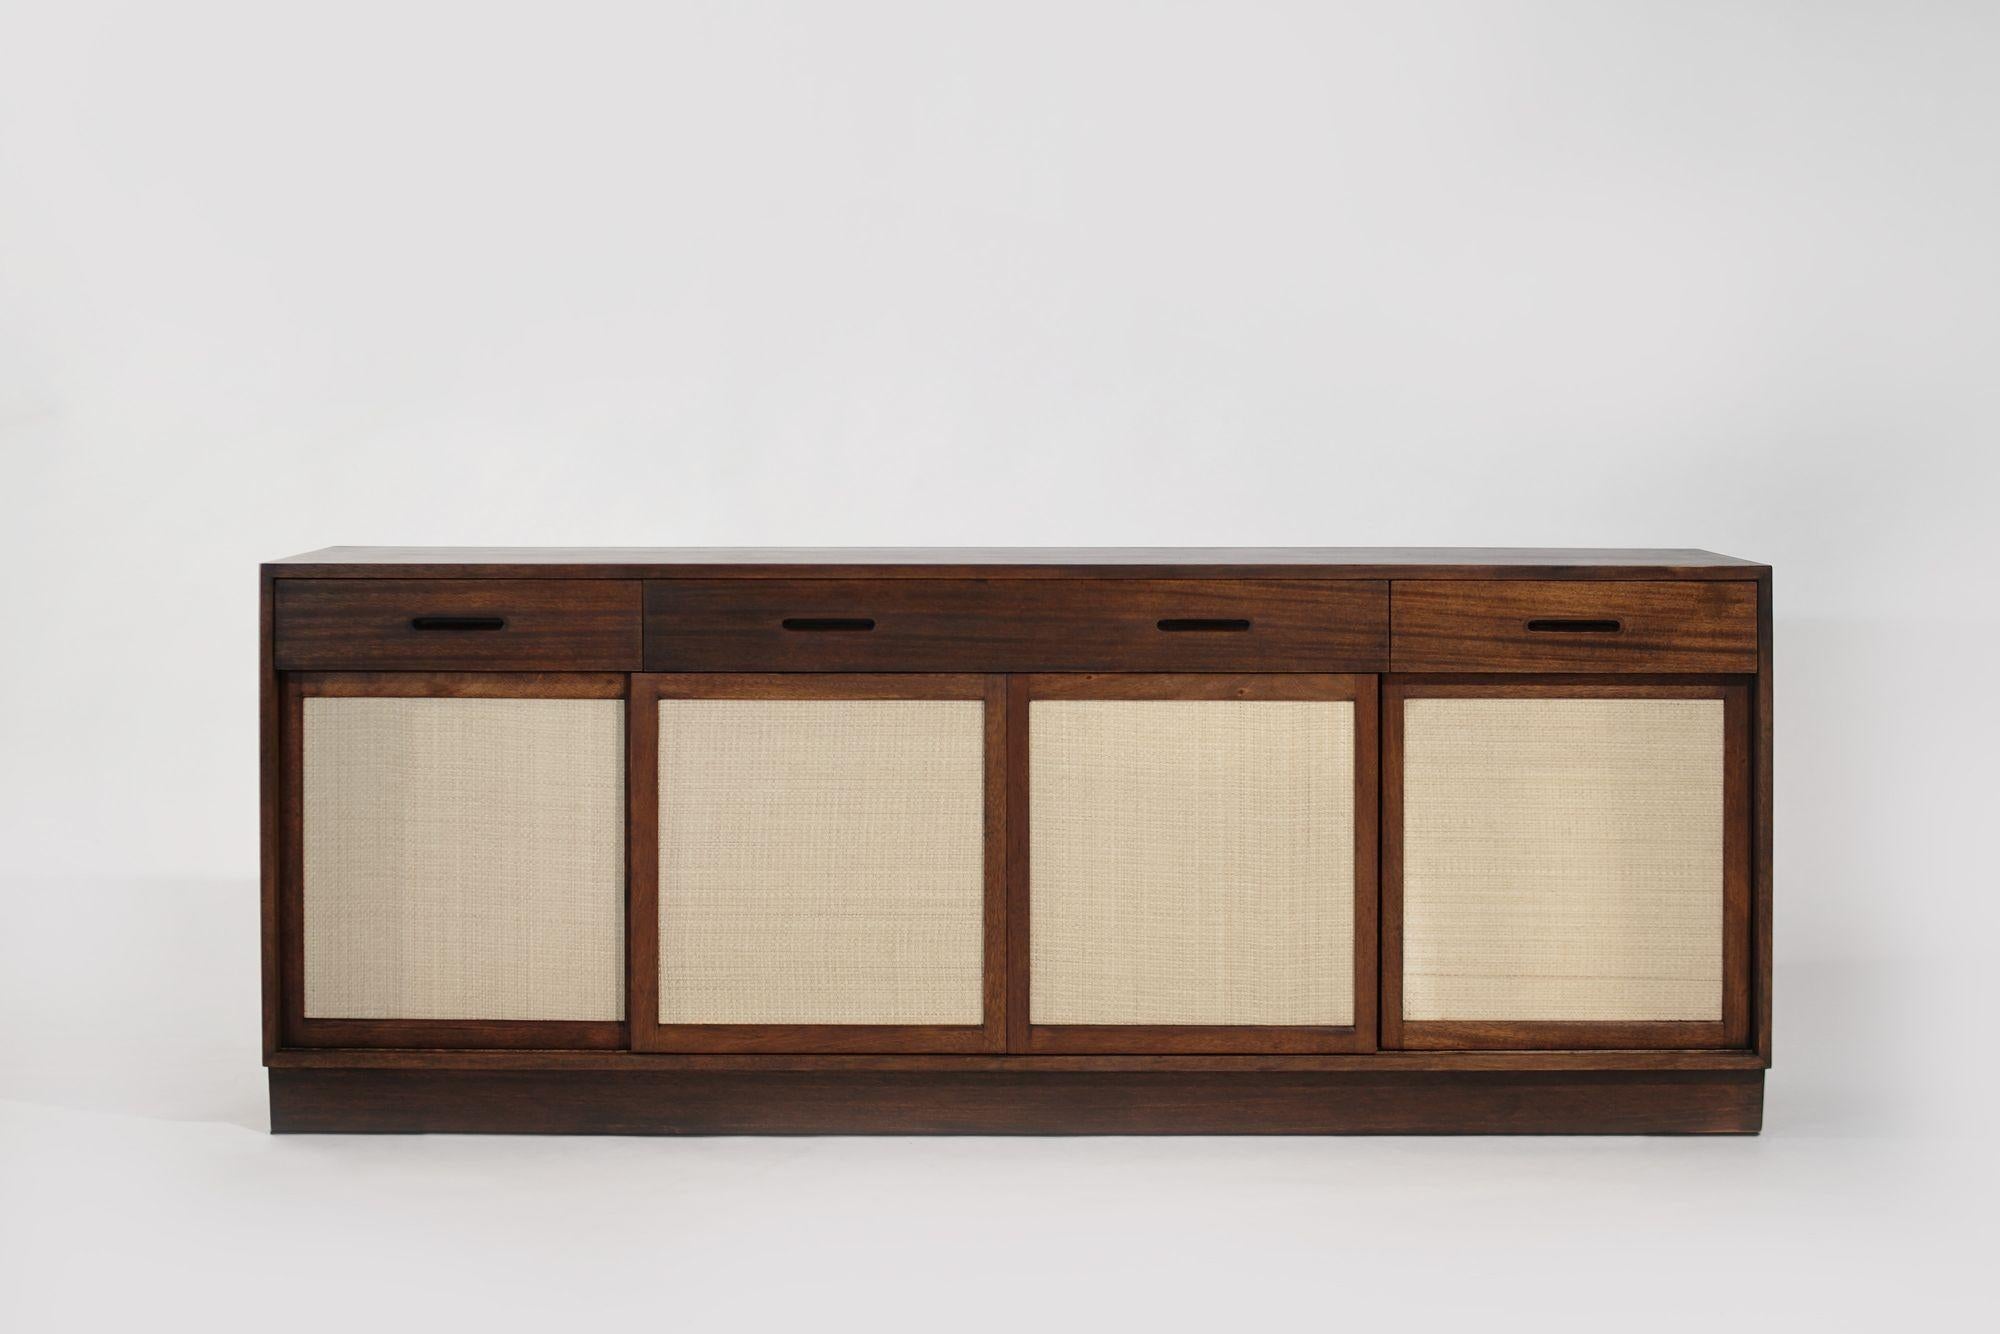 A mid-century modern gem, this mahogany credenza by Edward Wormley for Dunbar exudes timeless elegance. Meticulously restored, its sleek design and ample storage make it a versatile and stylish addition to any space. Add a touch of mid-century flair